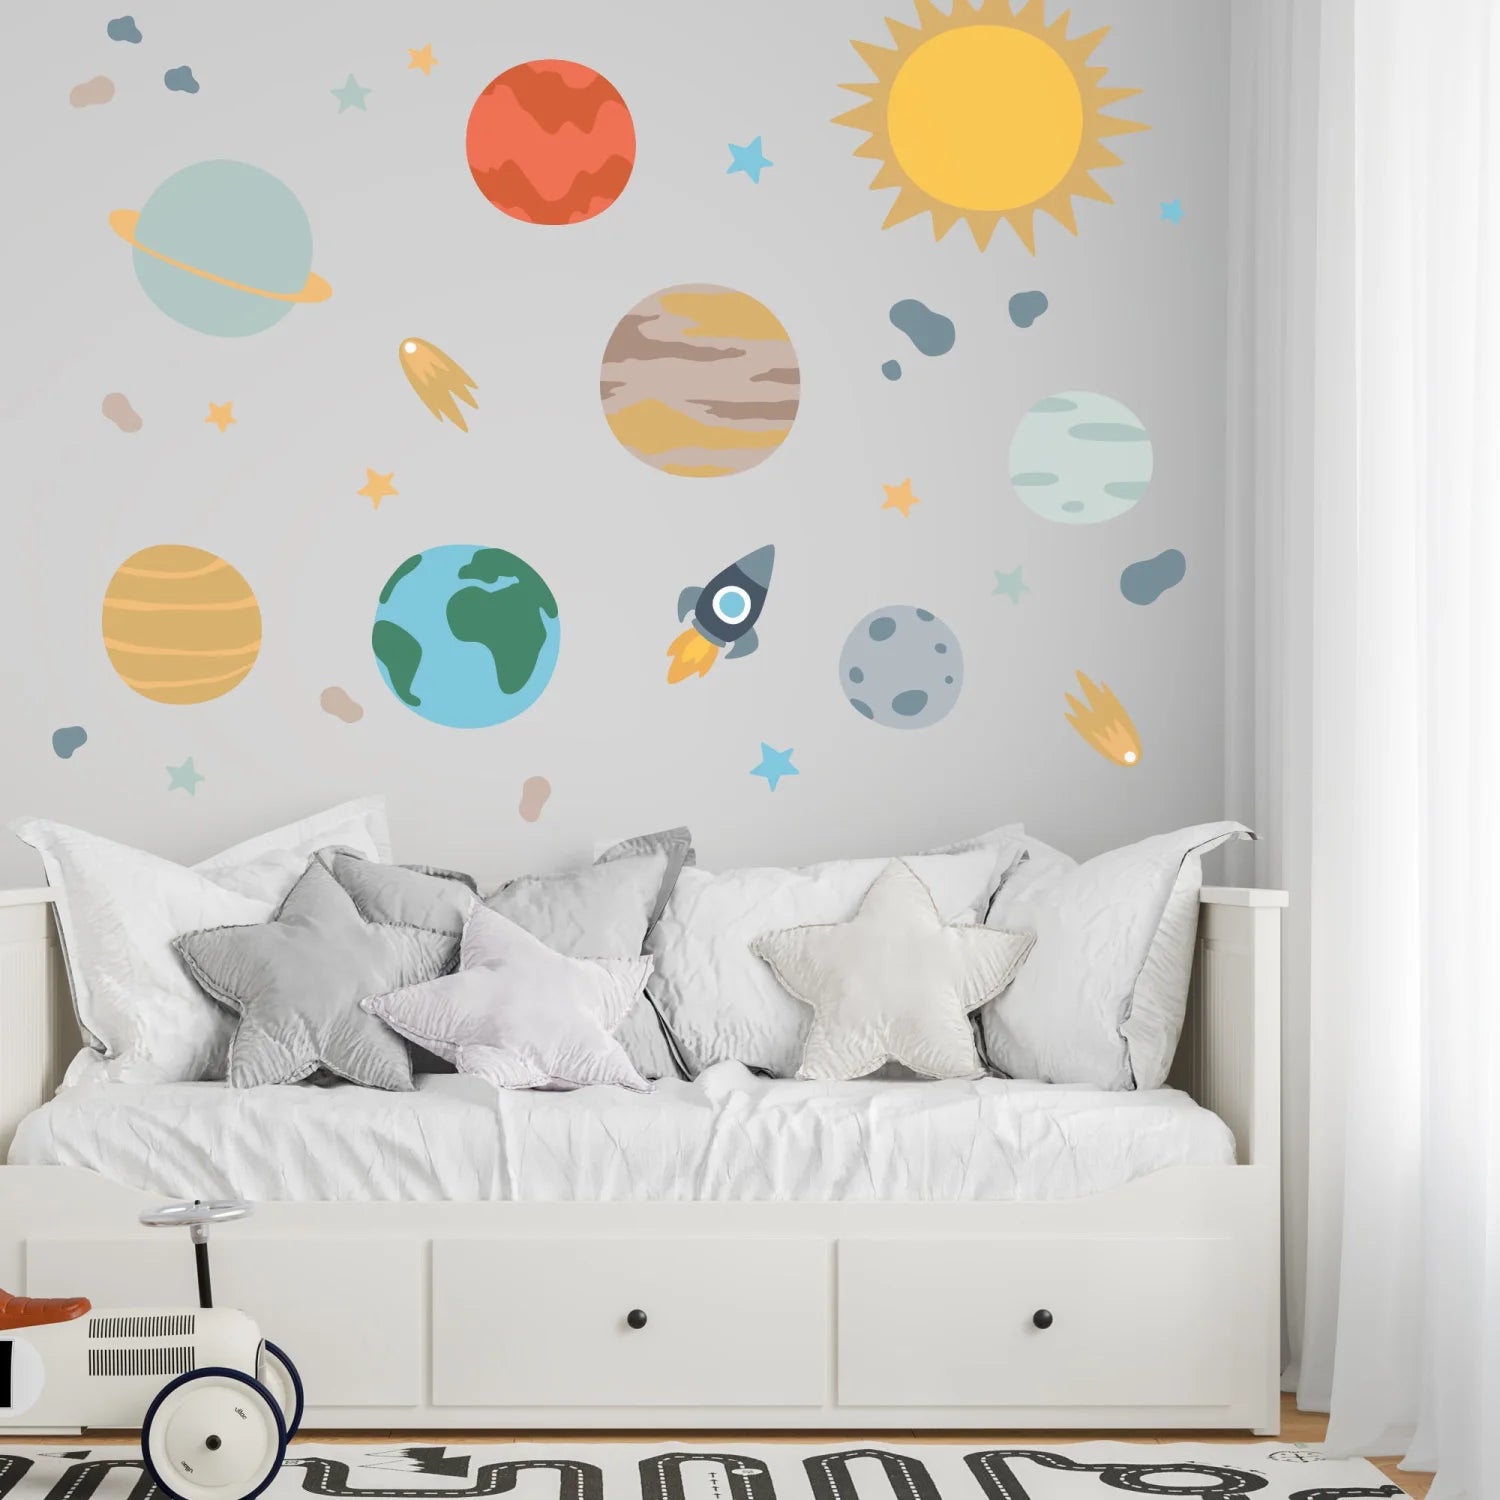 Big Planets Wall Decal - Decals Sea and Space